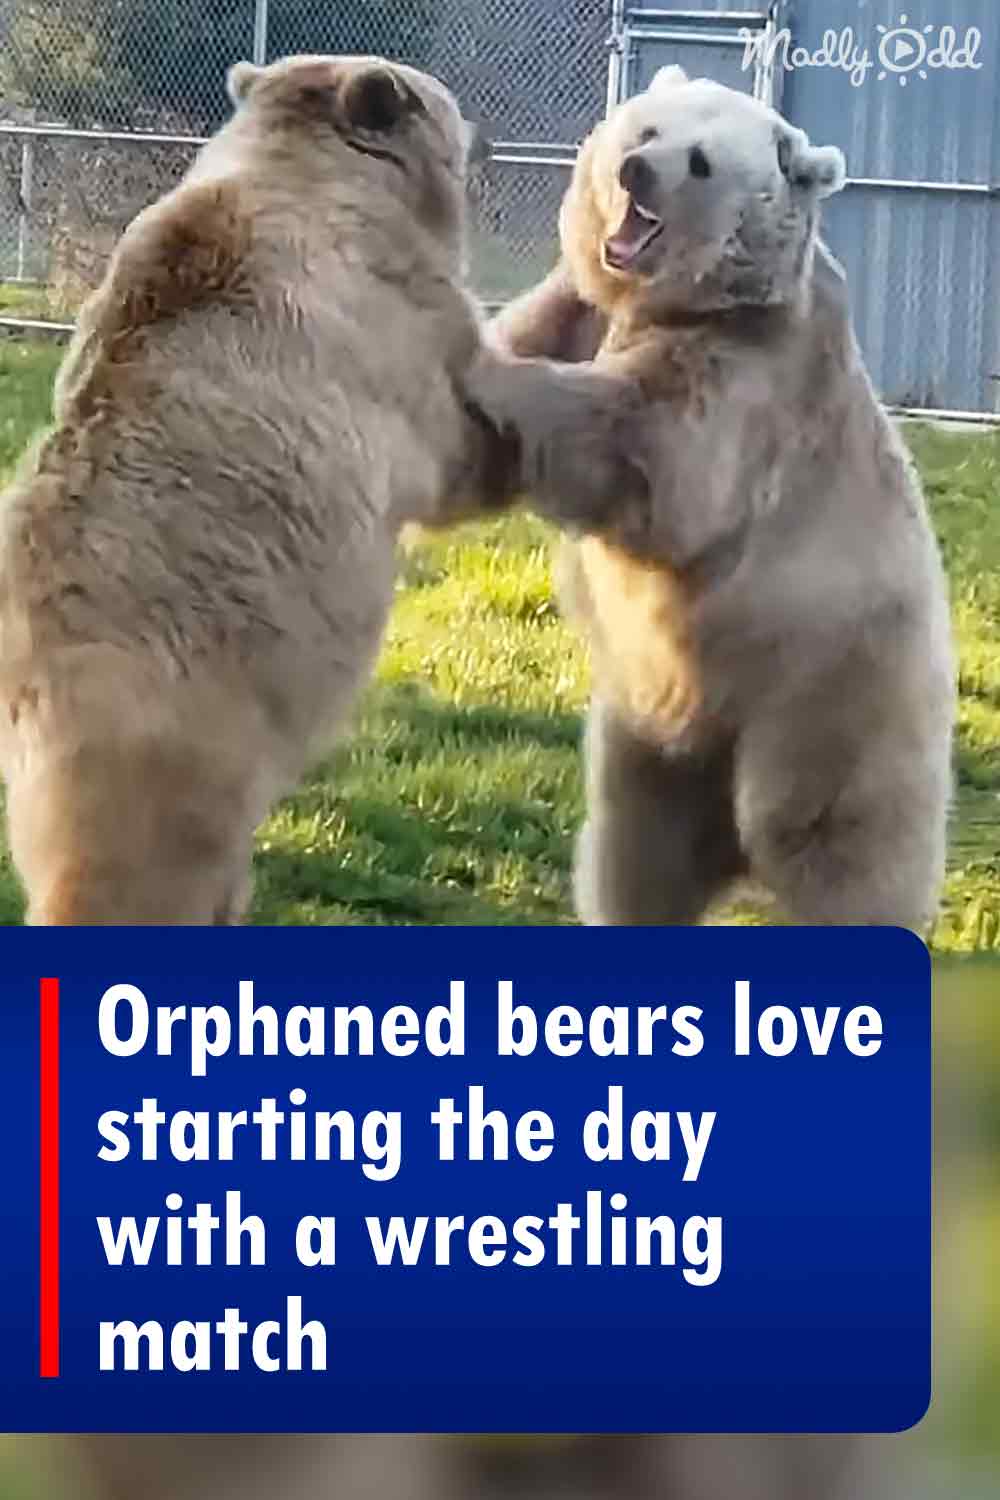 Orphaned bears love starting the day with a wrestling match